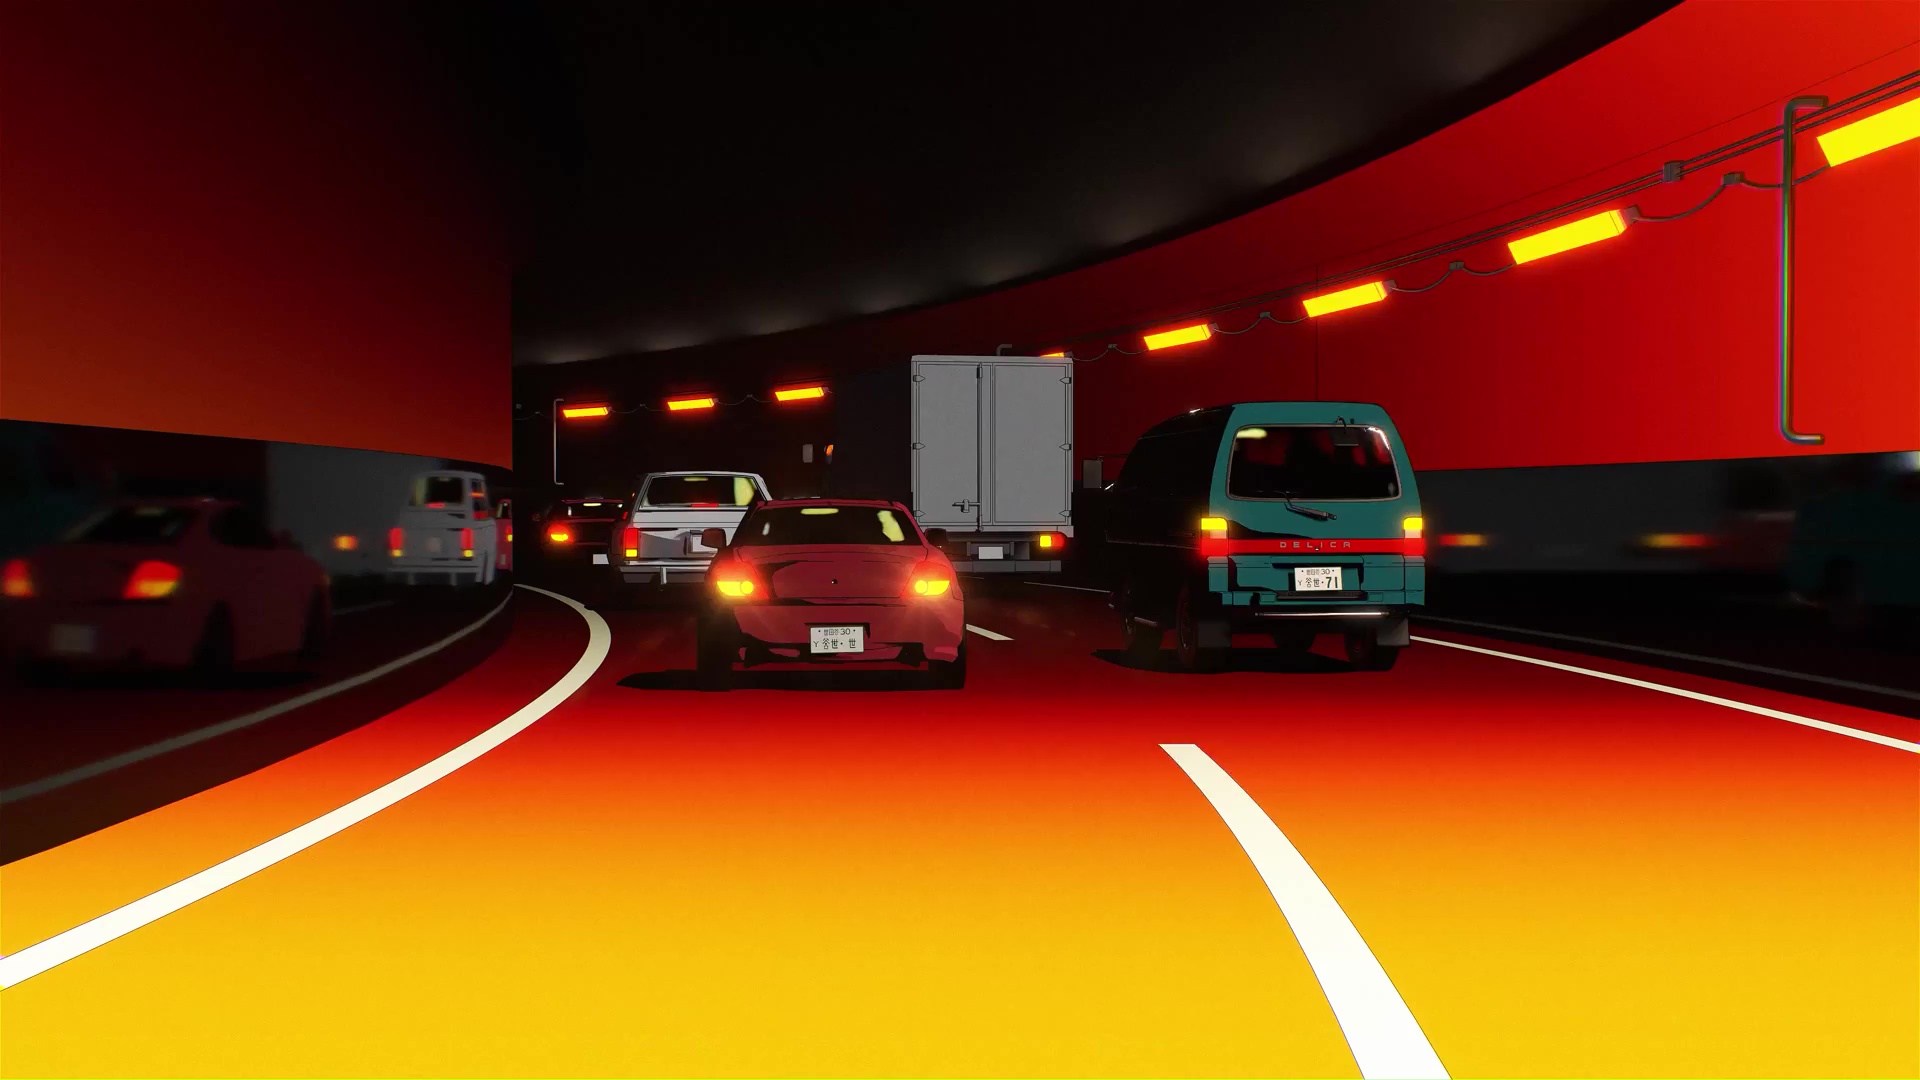 Highway Animated Wallpaper (4k - 3840x2160) by   on @DeviantArt